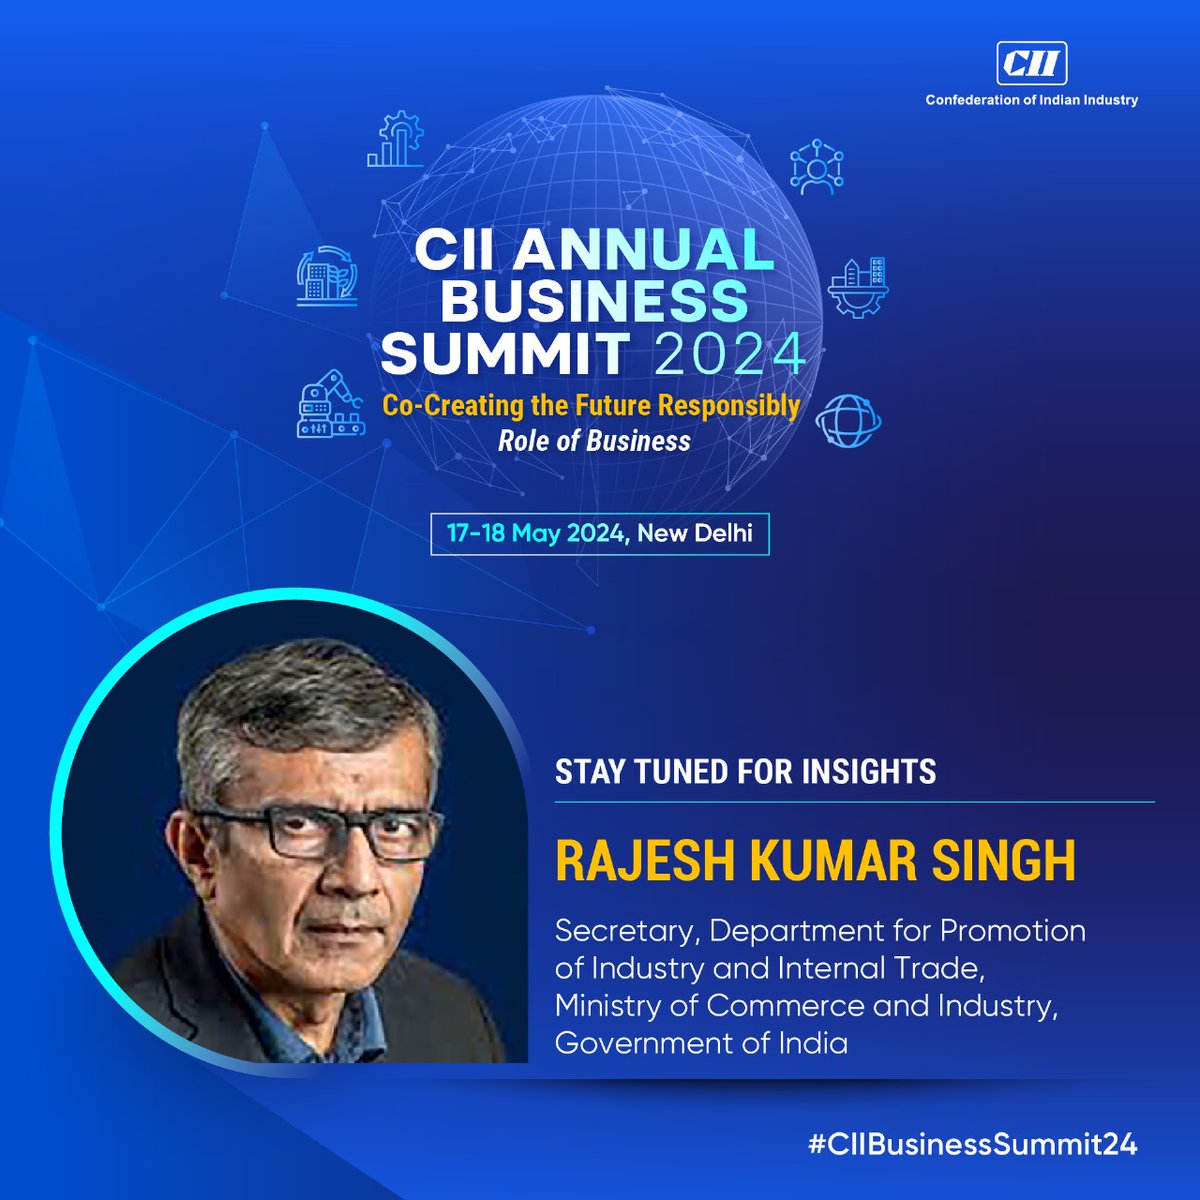 Listen to Rajesh Kumar Singh, Secretary, Department for Promotion of Industry and Internal Trade, Ministry of Commerce and Industry, Government of India share thoughts at the CII Annual Business Summit 2024! Be a part of the deliberations focused on India's progress on